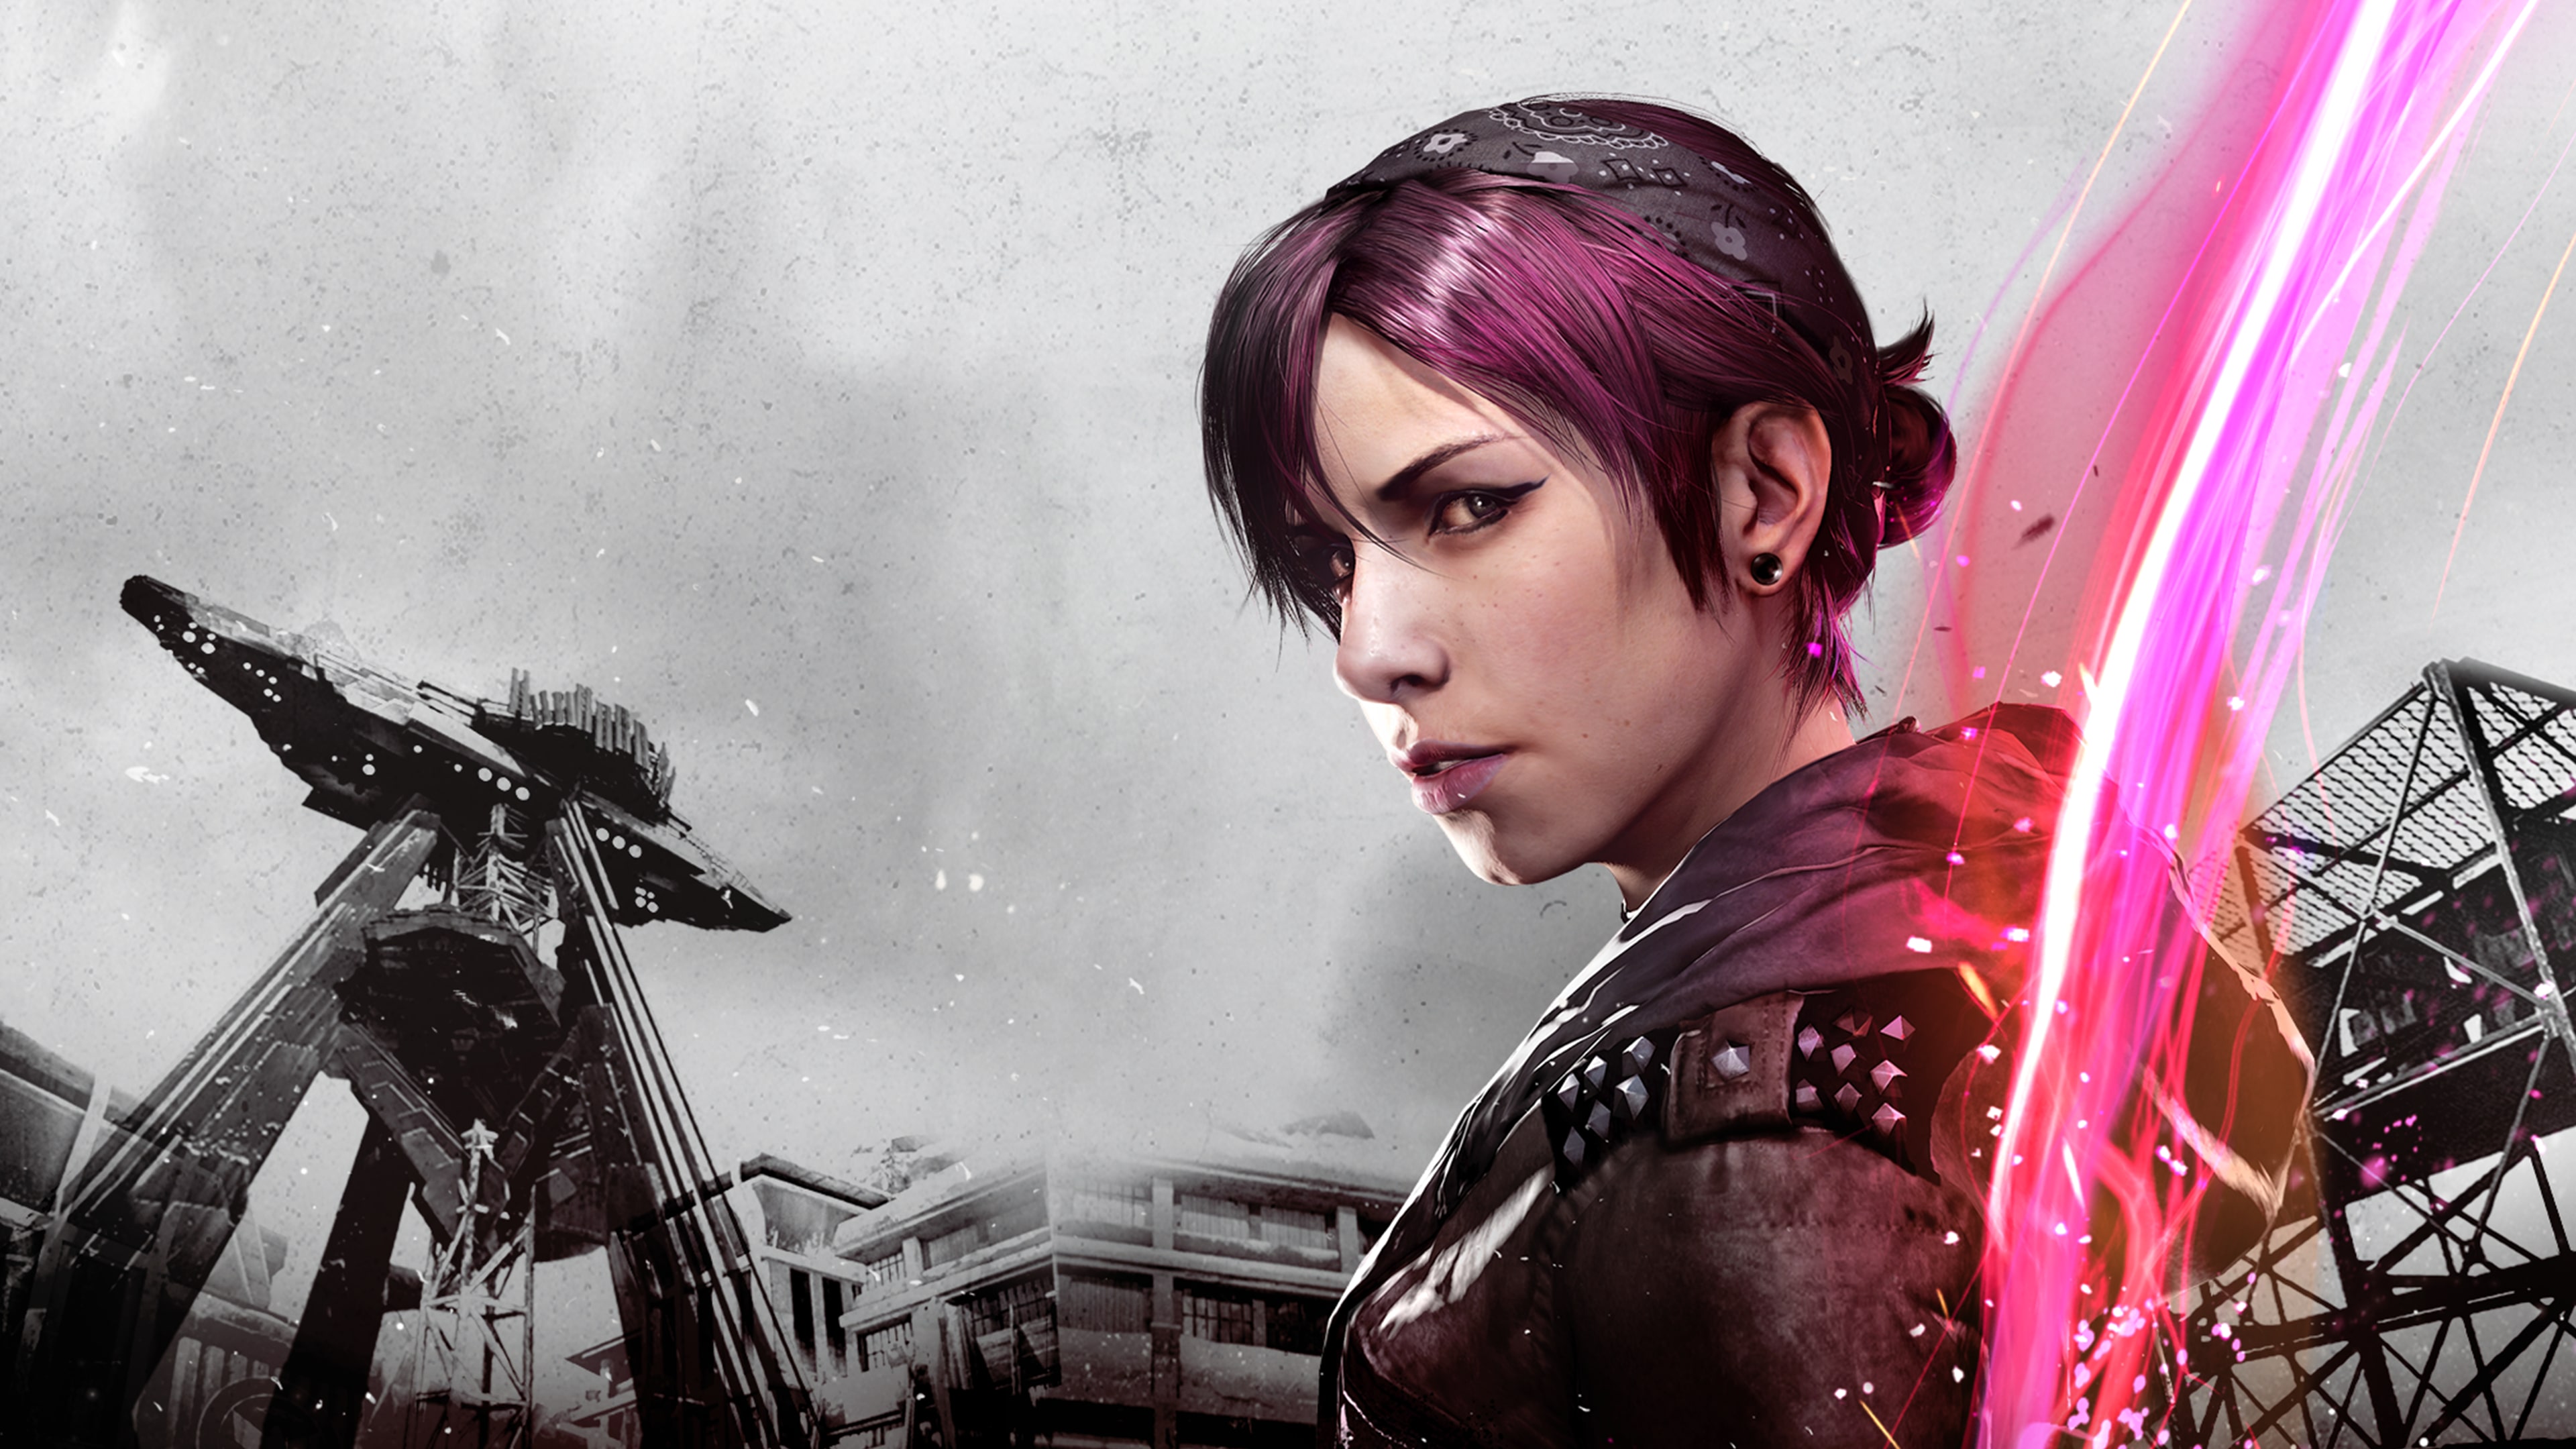 inFAMOUS First Light™